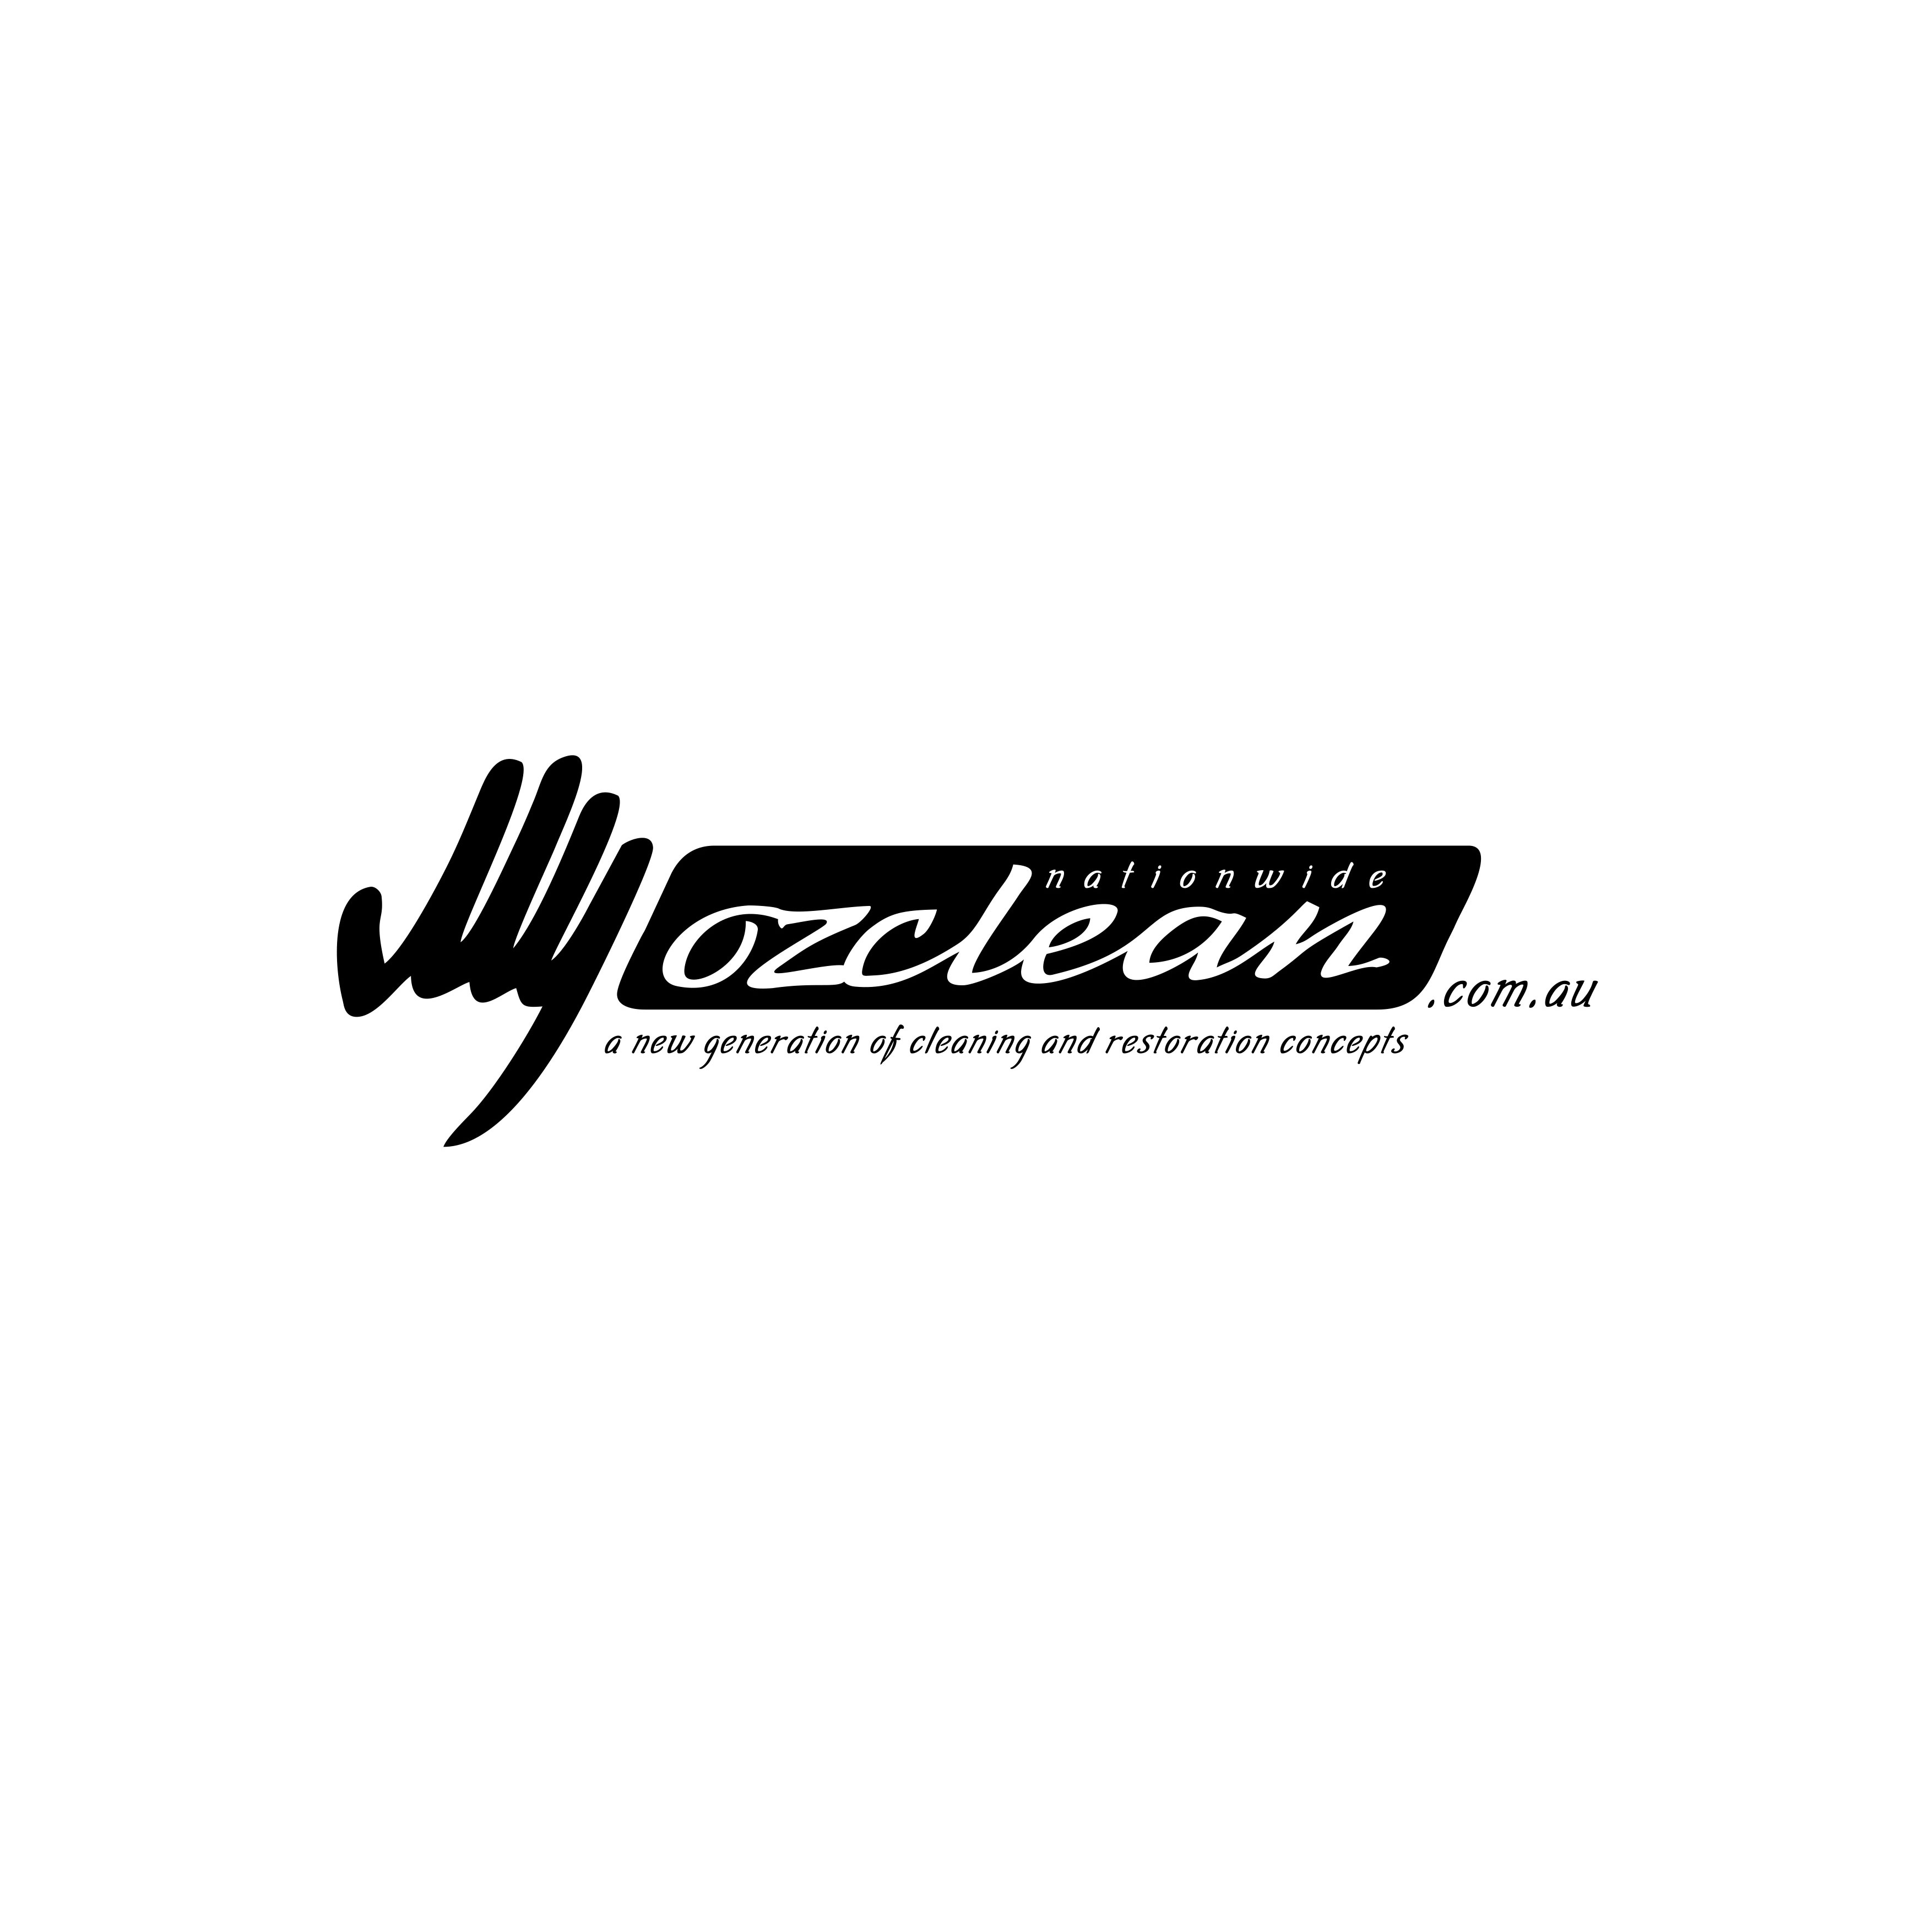 Ozclean - The Best Professional Cleaners in Australia'